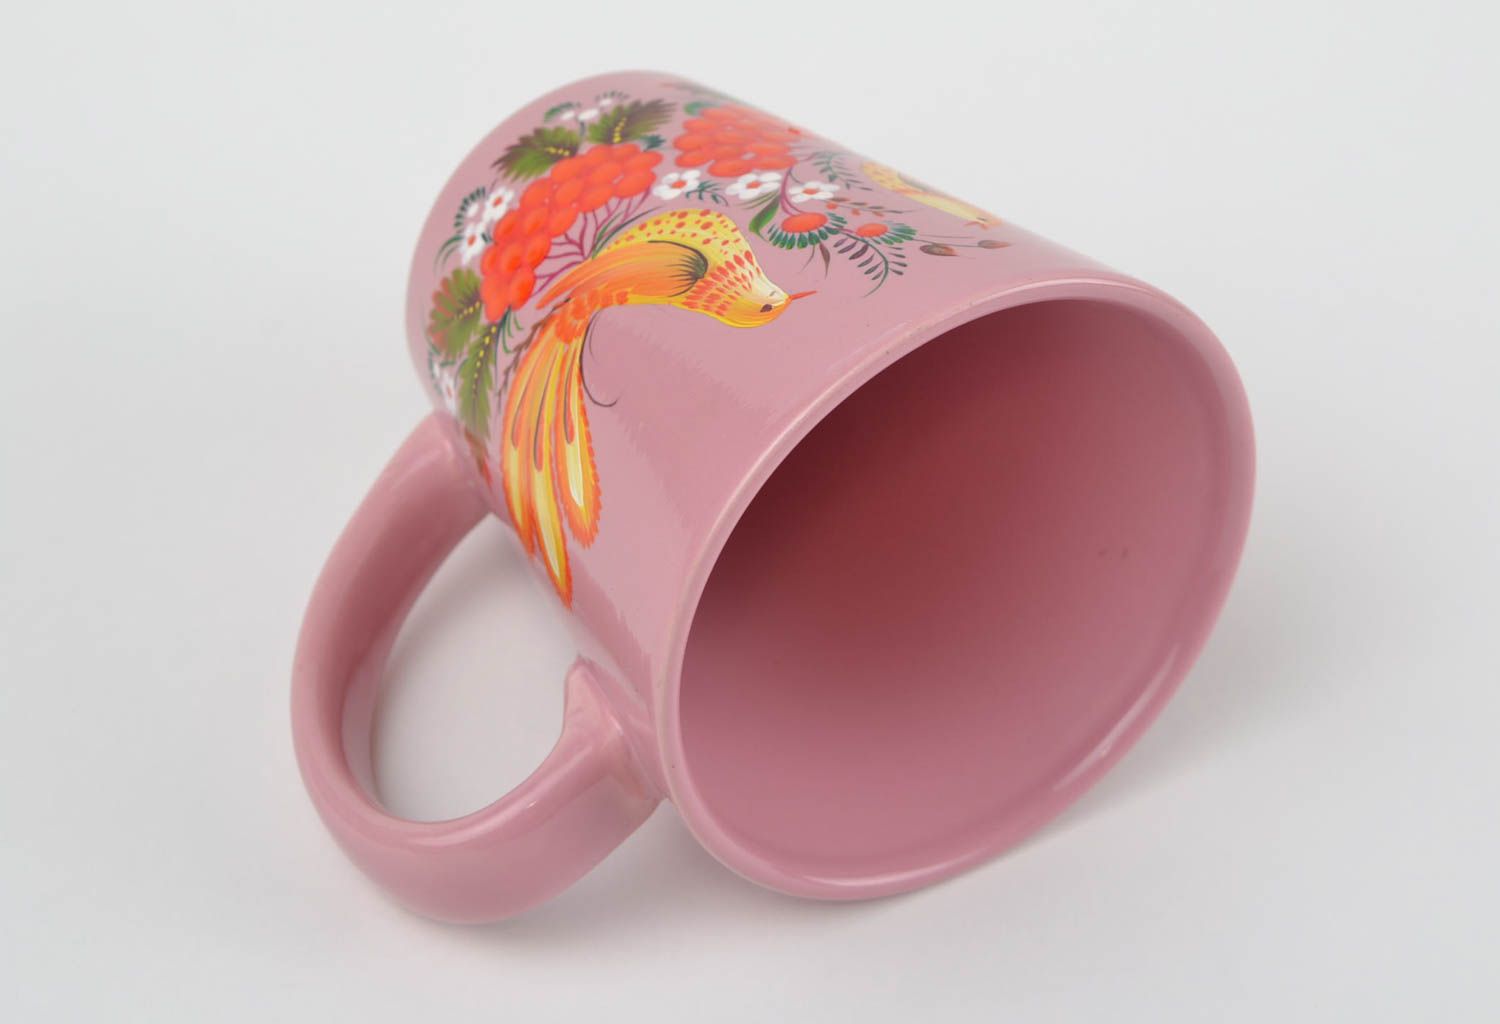 Pink ceramic teacup in Russian style with floral pattern 0,82 lb photo 1